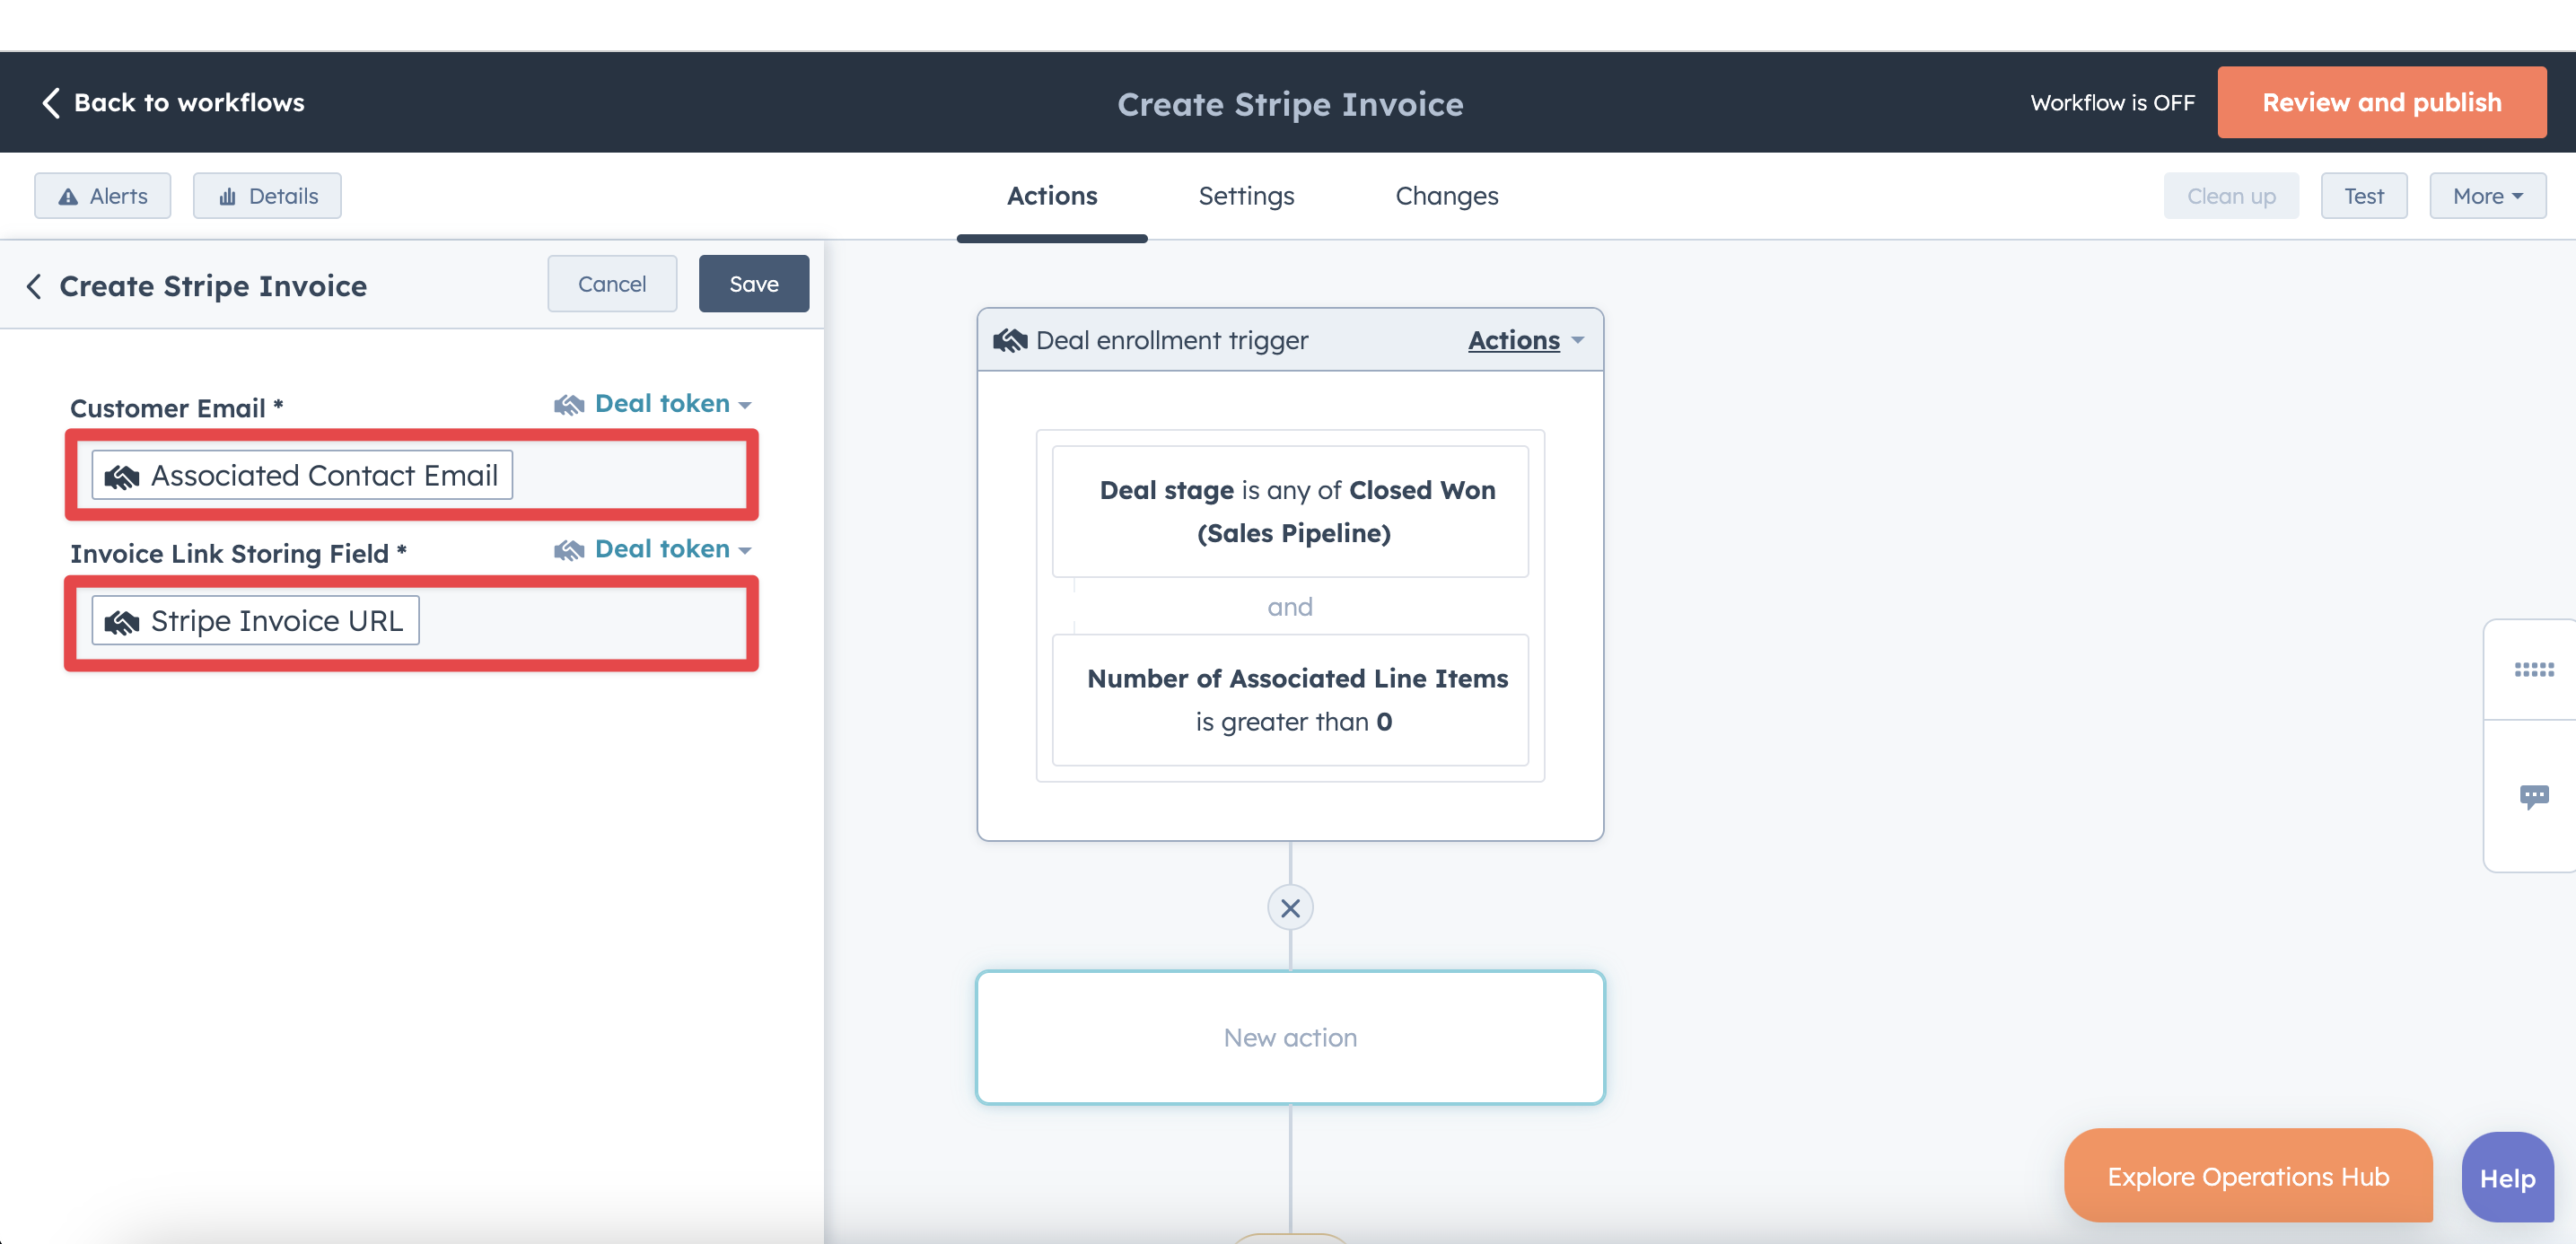 How to create a stripe invoice link in HubSpot